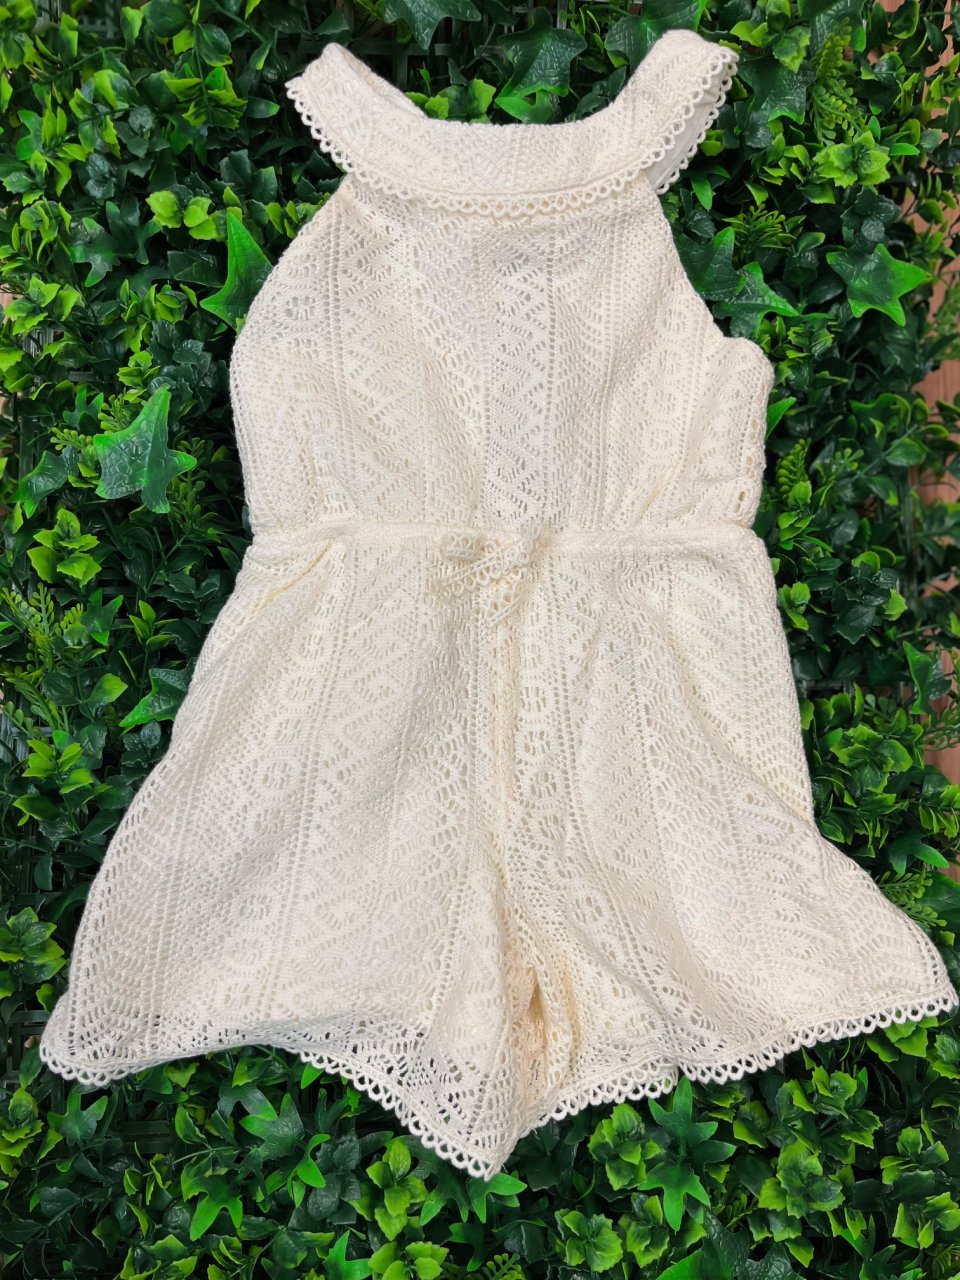 MAYORAL 3862 CREAM LACE ALL IN ONE PLAYSUIT OPEN BACK DETAIL 6,7 9YRS ONLY 